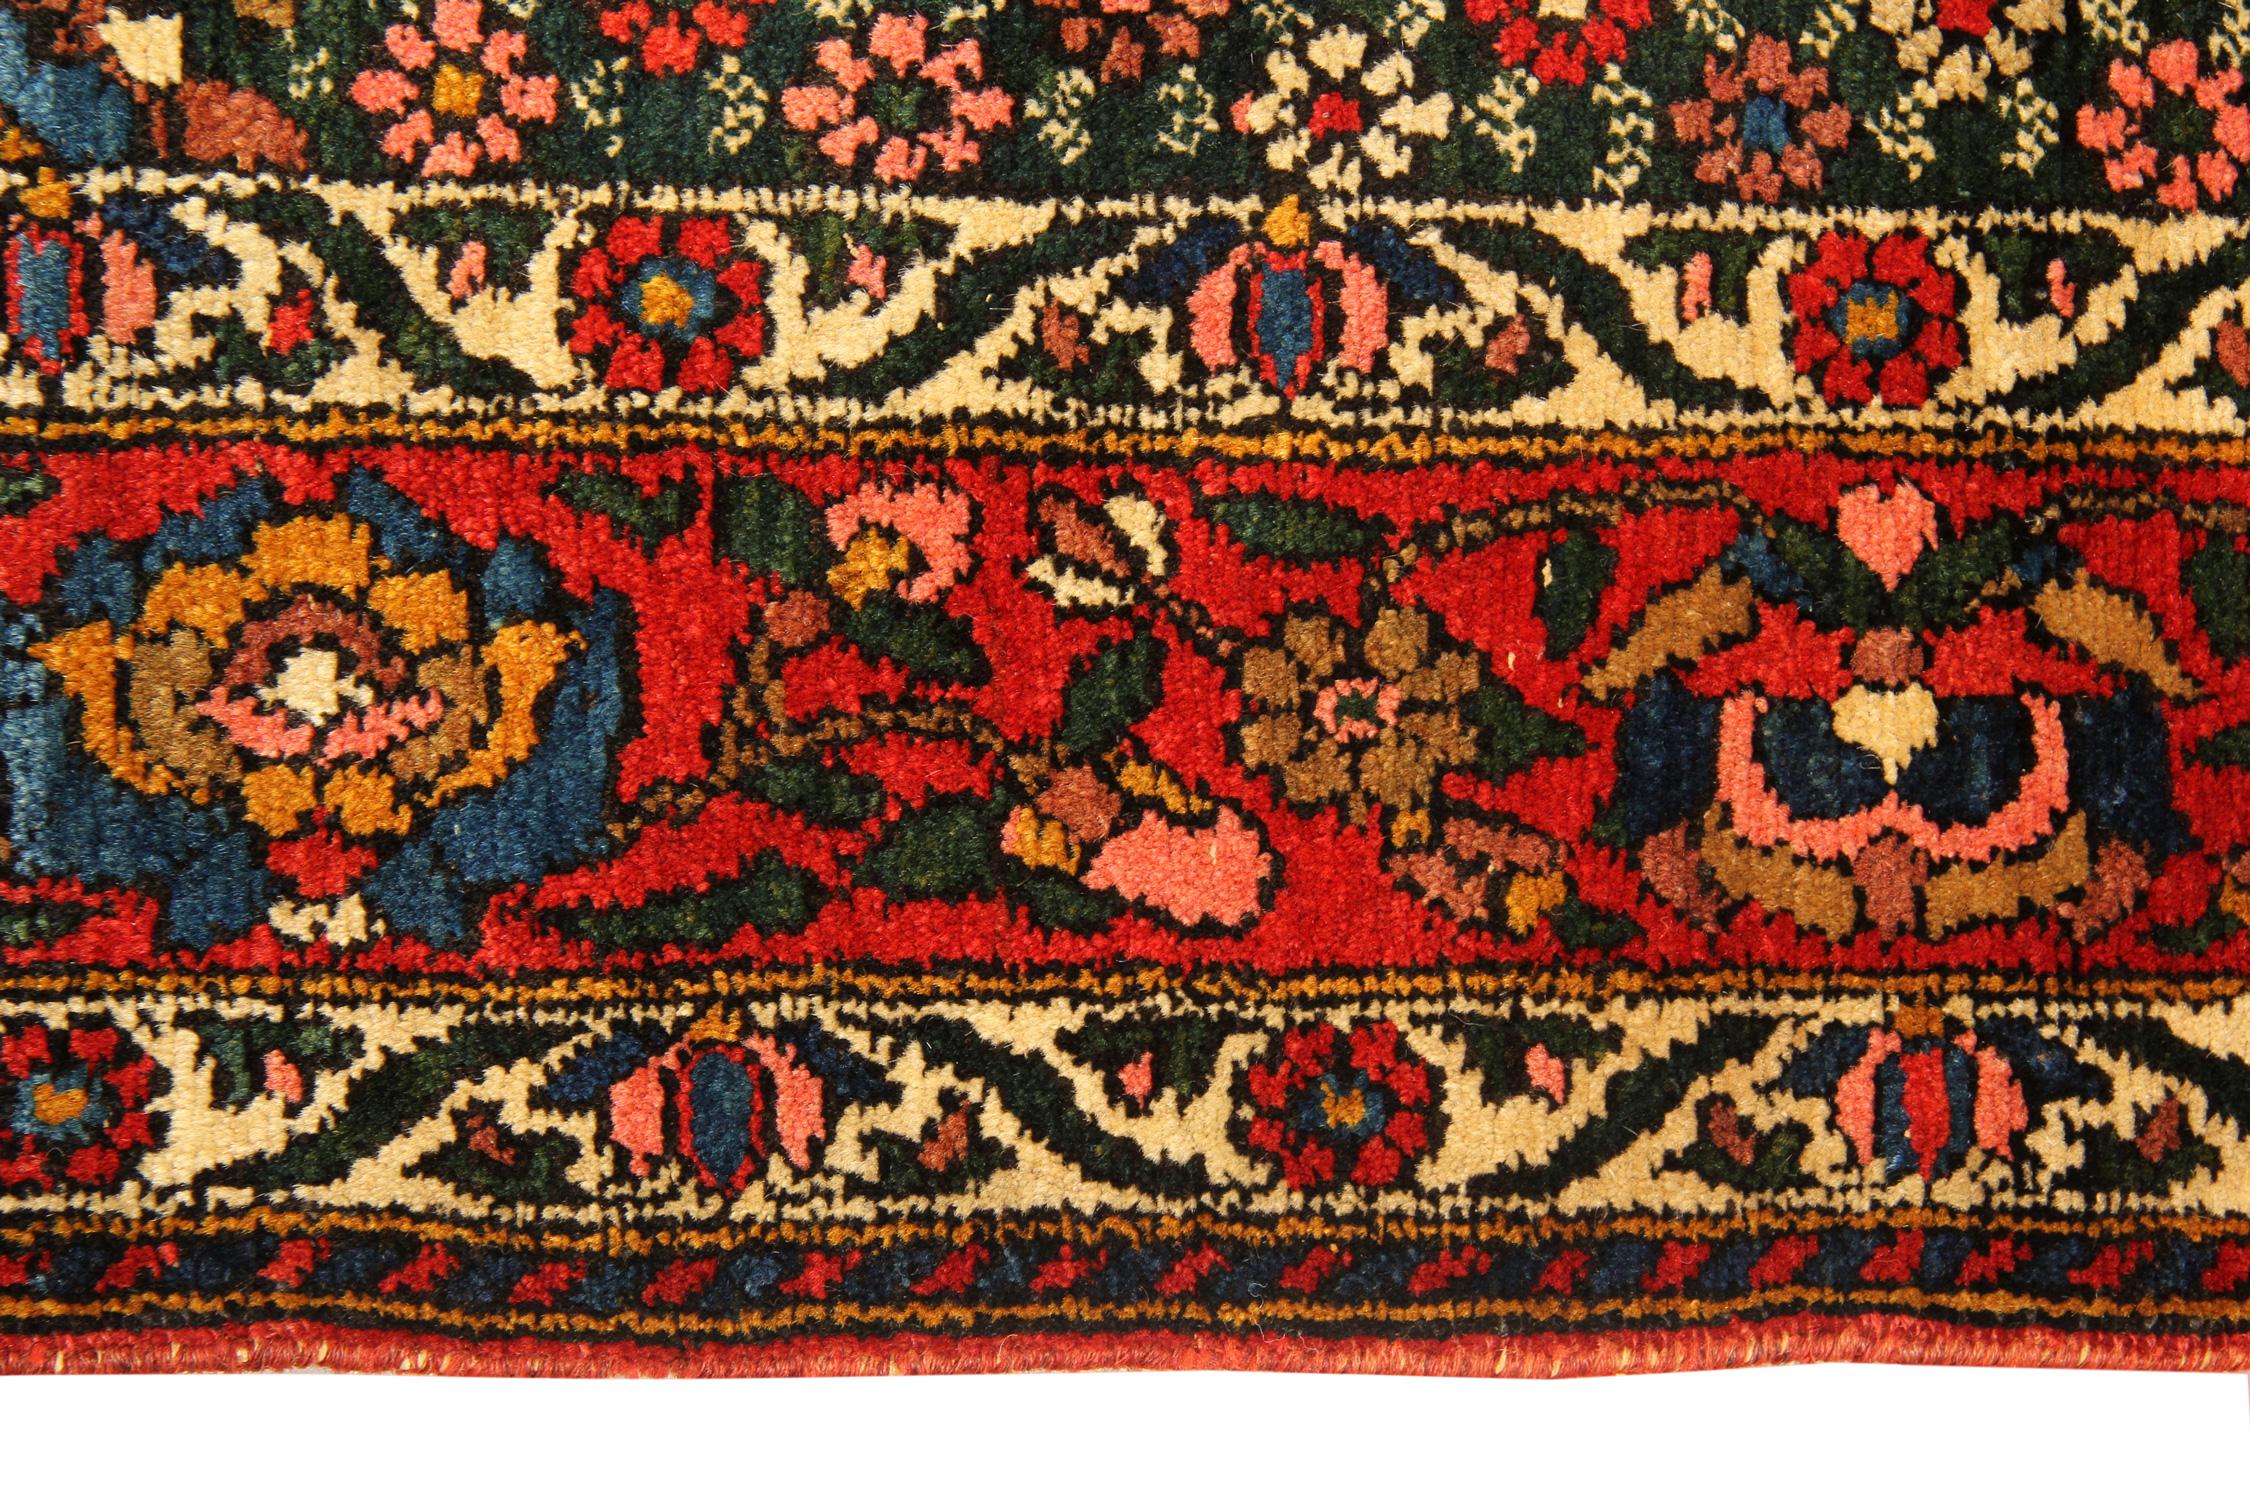 This is a beautiful example of the 19th century antique Persian Baktiyar rugs with a bold medallion on an 